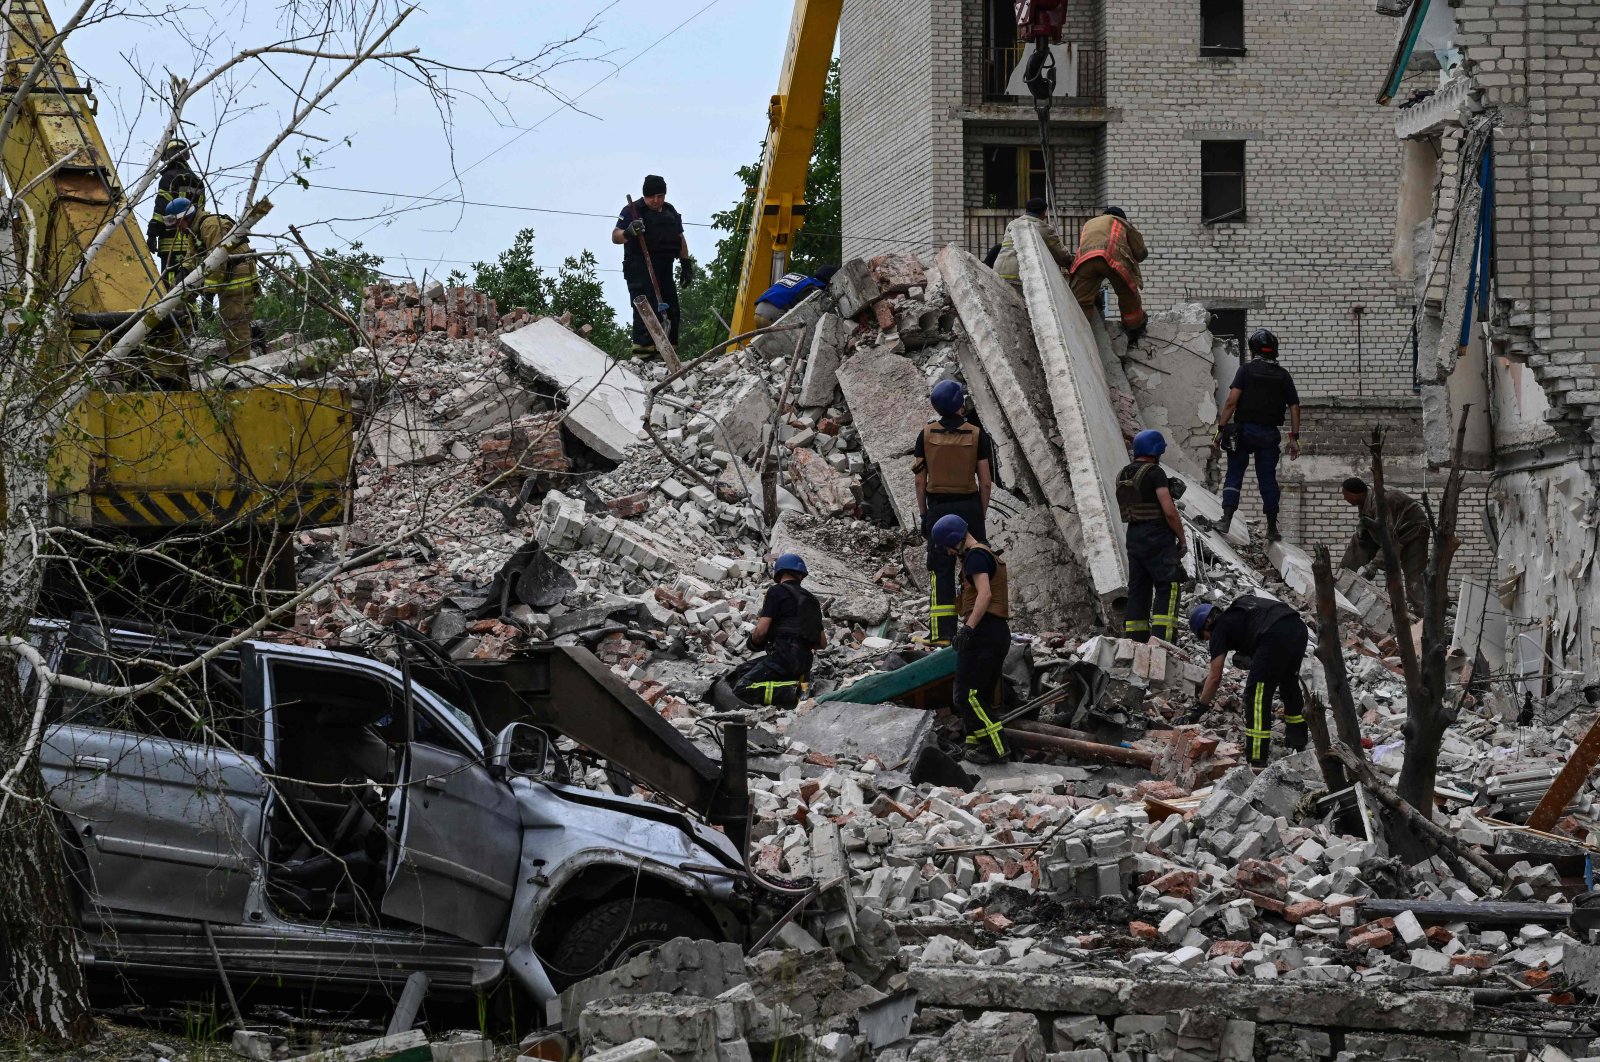 Rescuers clear the scene after a building was partially destroyed in a Russian missile strike, Chasiv Yar, eastern Ukraine, July 10, 2022. (AFP Photo)